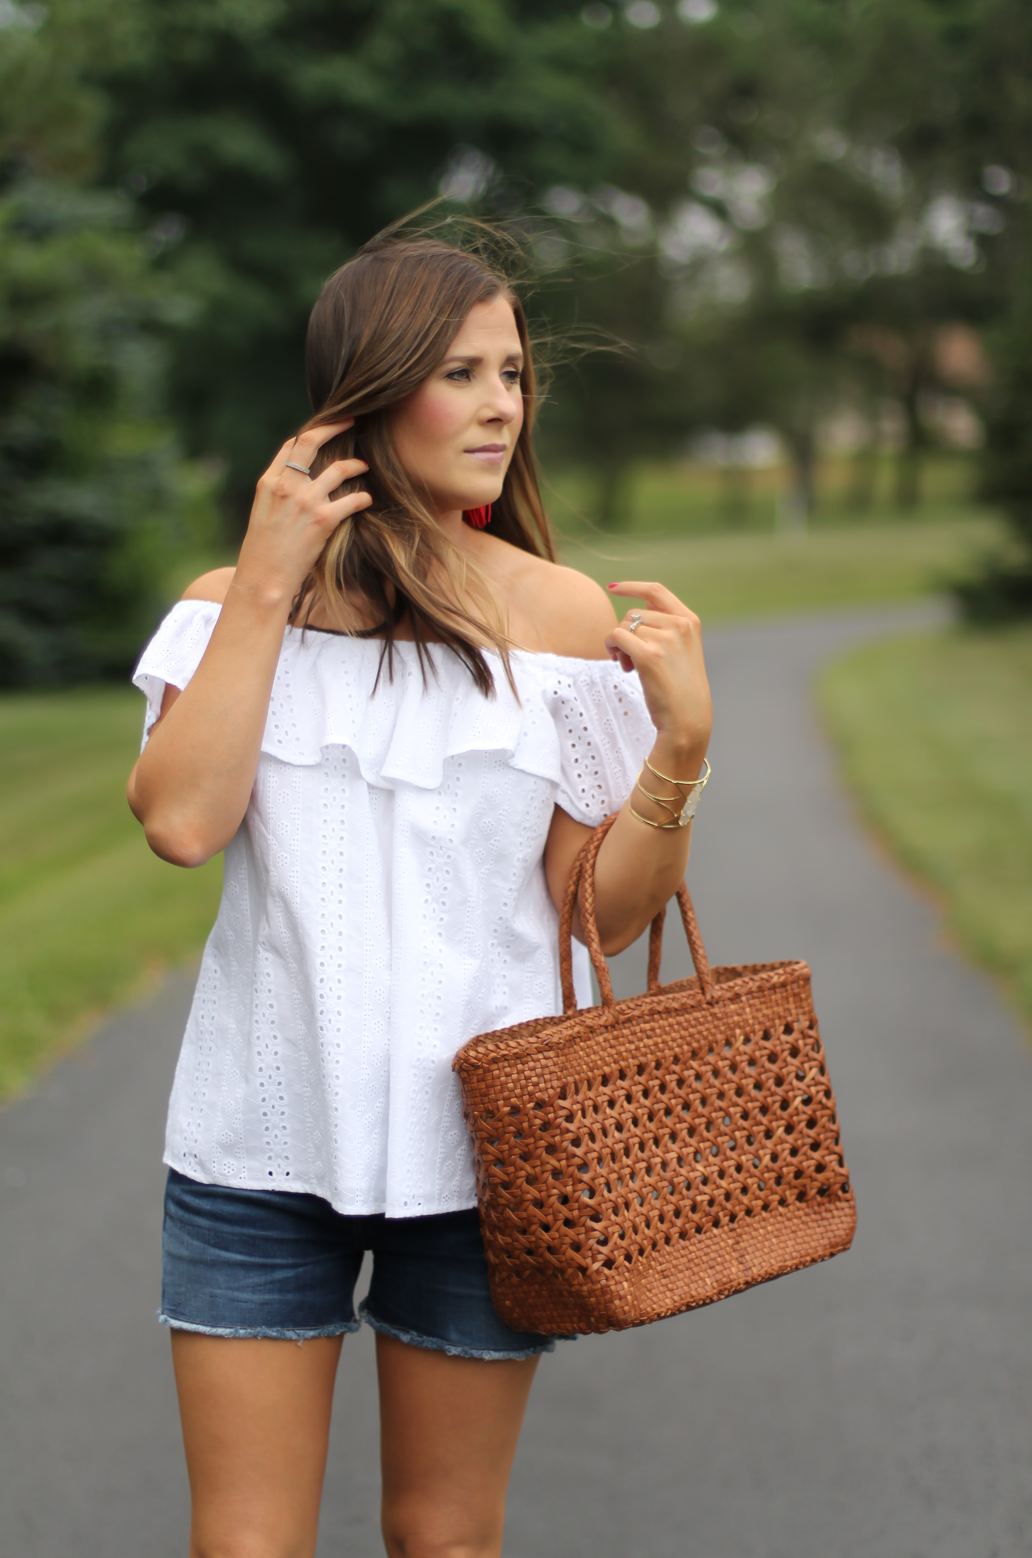 White Eyelet Off the Shoulder Blouse, Dark Rinse Cutoff Denim Shorts, Tan Leather Wedge Sandal, Leather Basket Tote, Red Tassel Earrings, Anthropologie, Citizens of Humanity, Madewell, J.Crew, Lisi Lerch 7